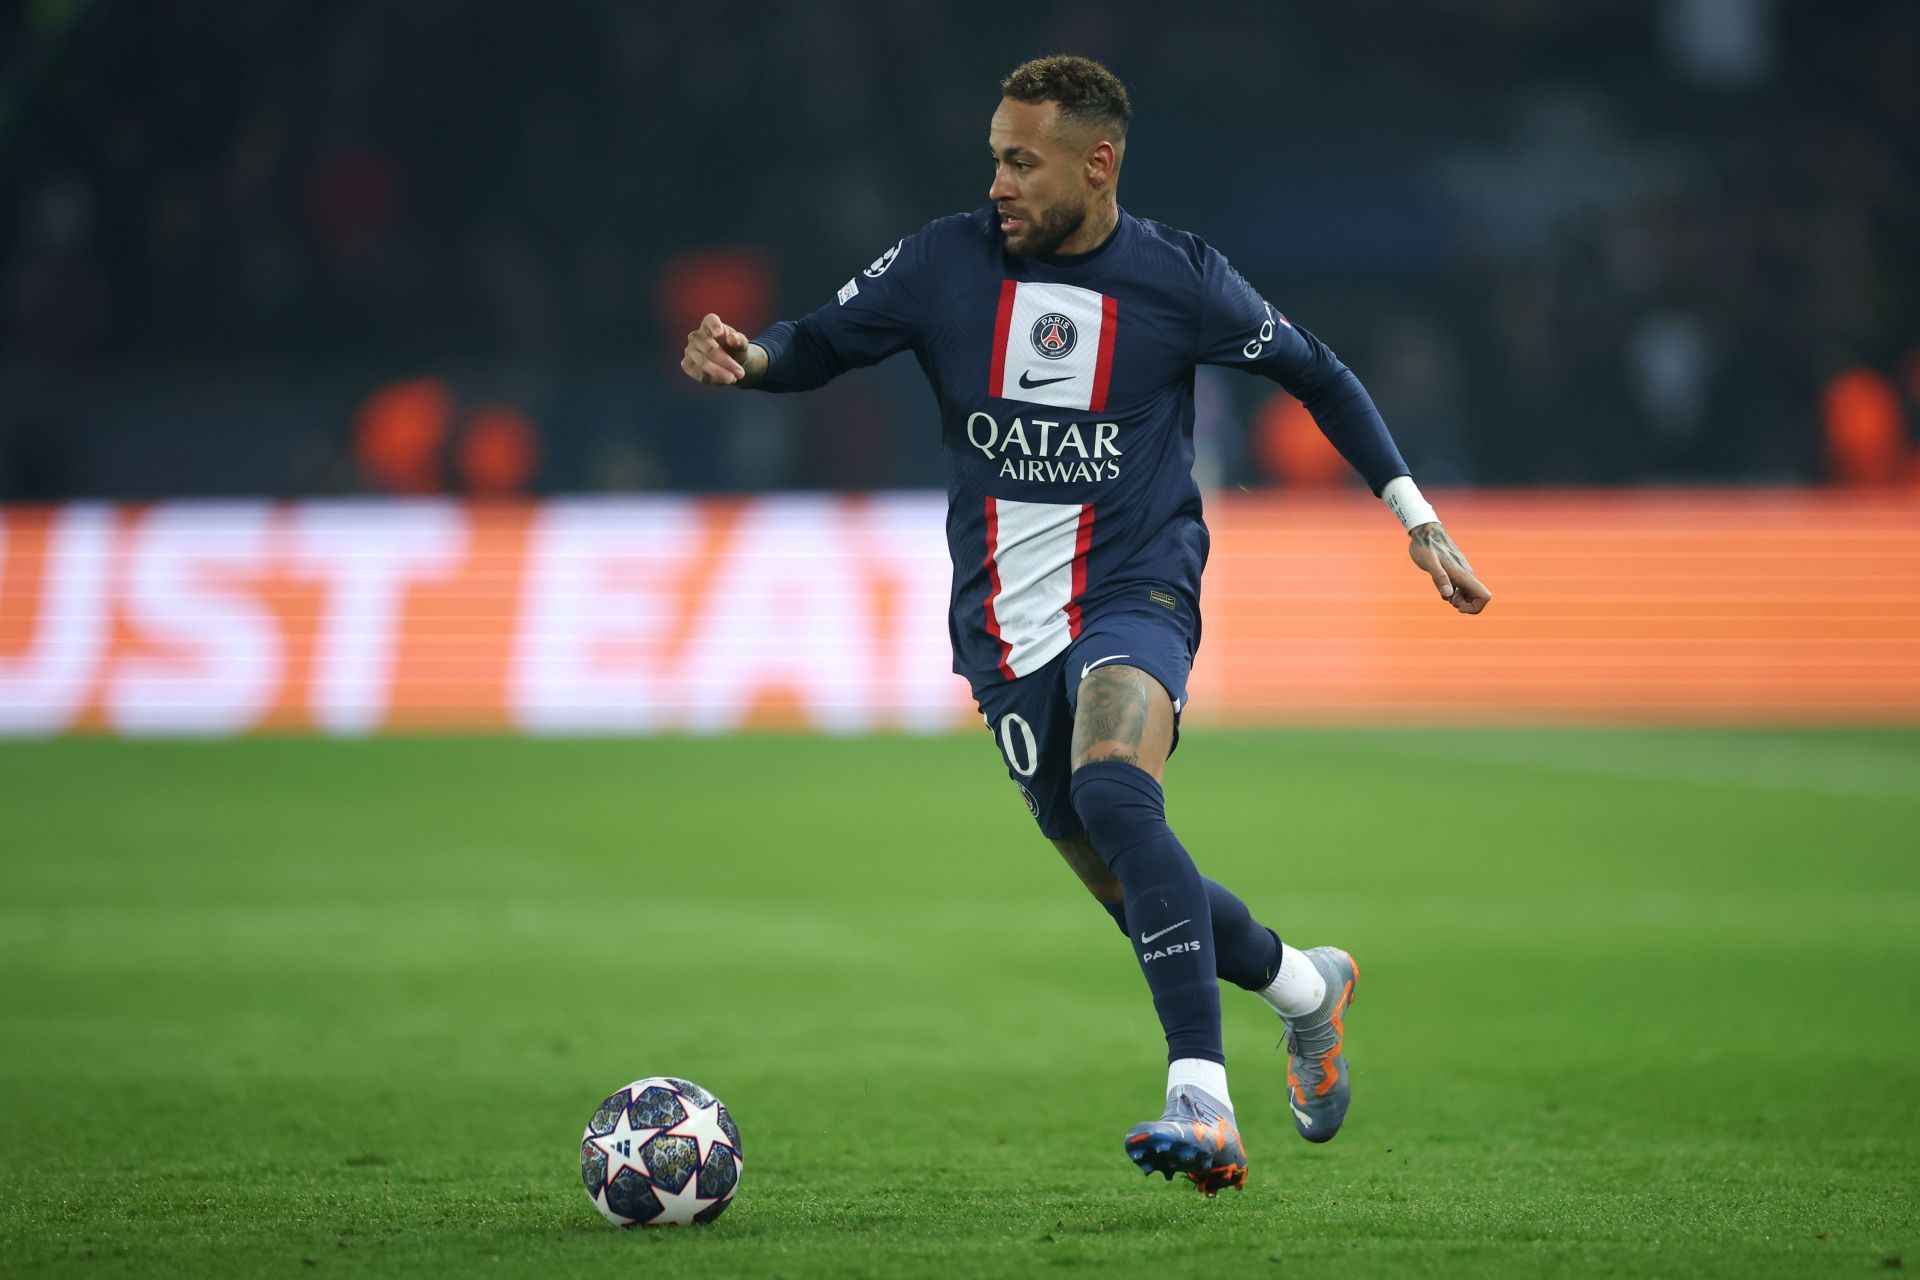 Neymar is linked with a move to Old Trafford this summer.